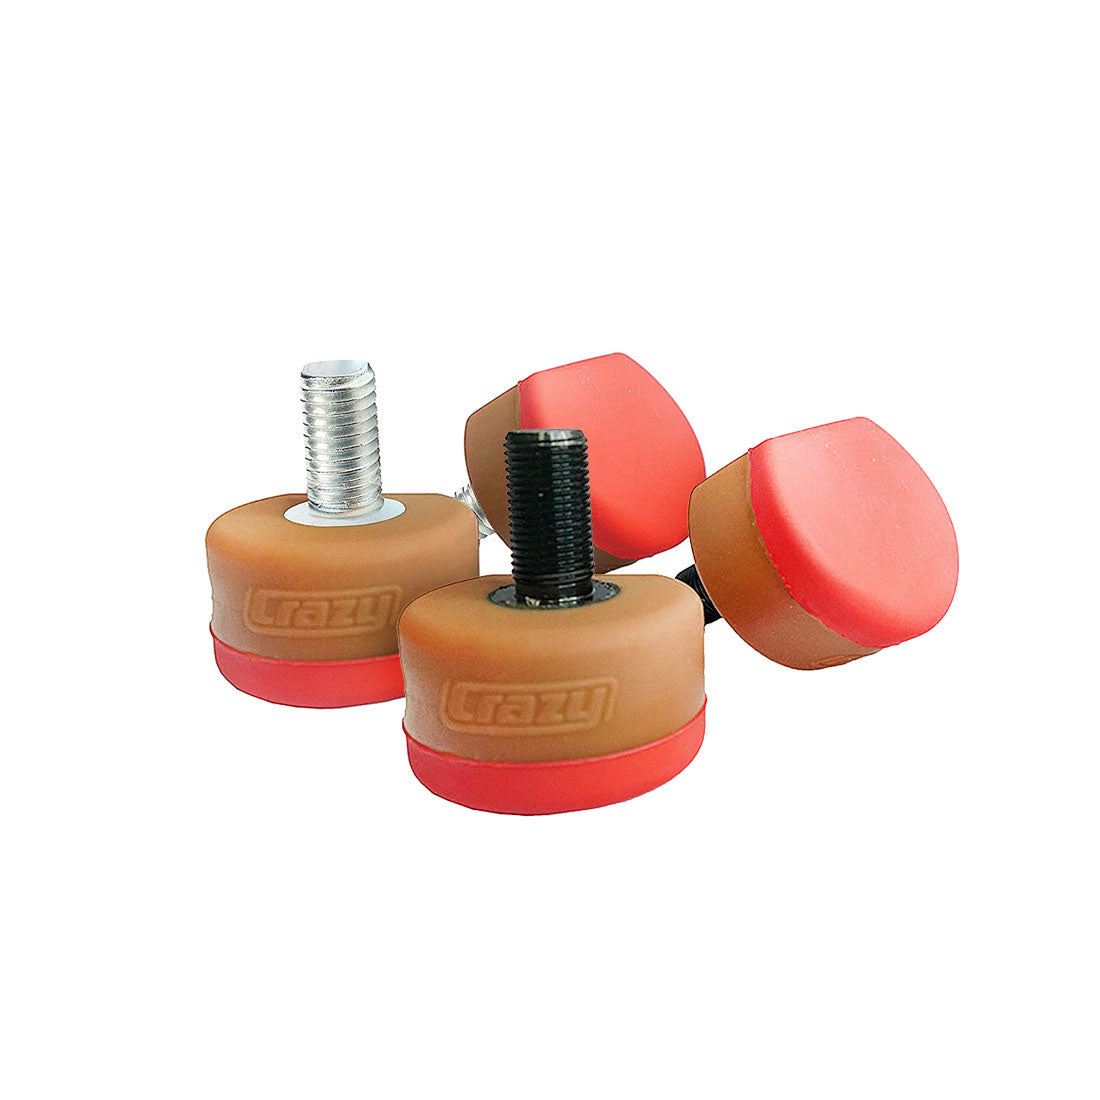 Crazy Big Bloc PRO Toe Stops Roller Skate Hardware and Parts